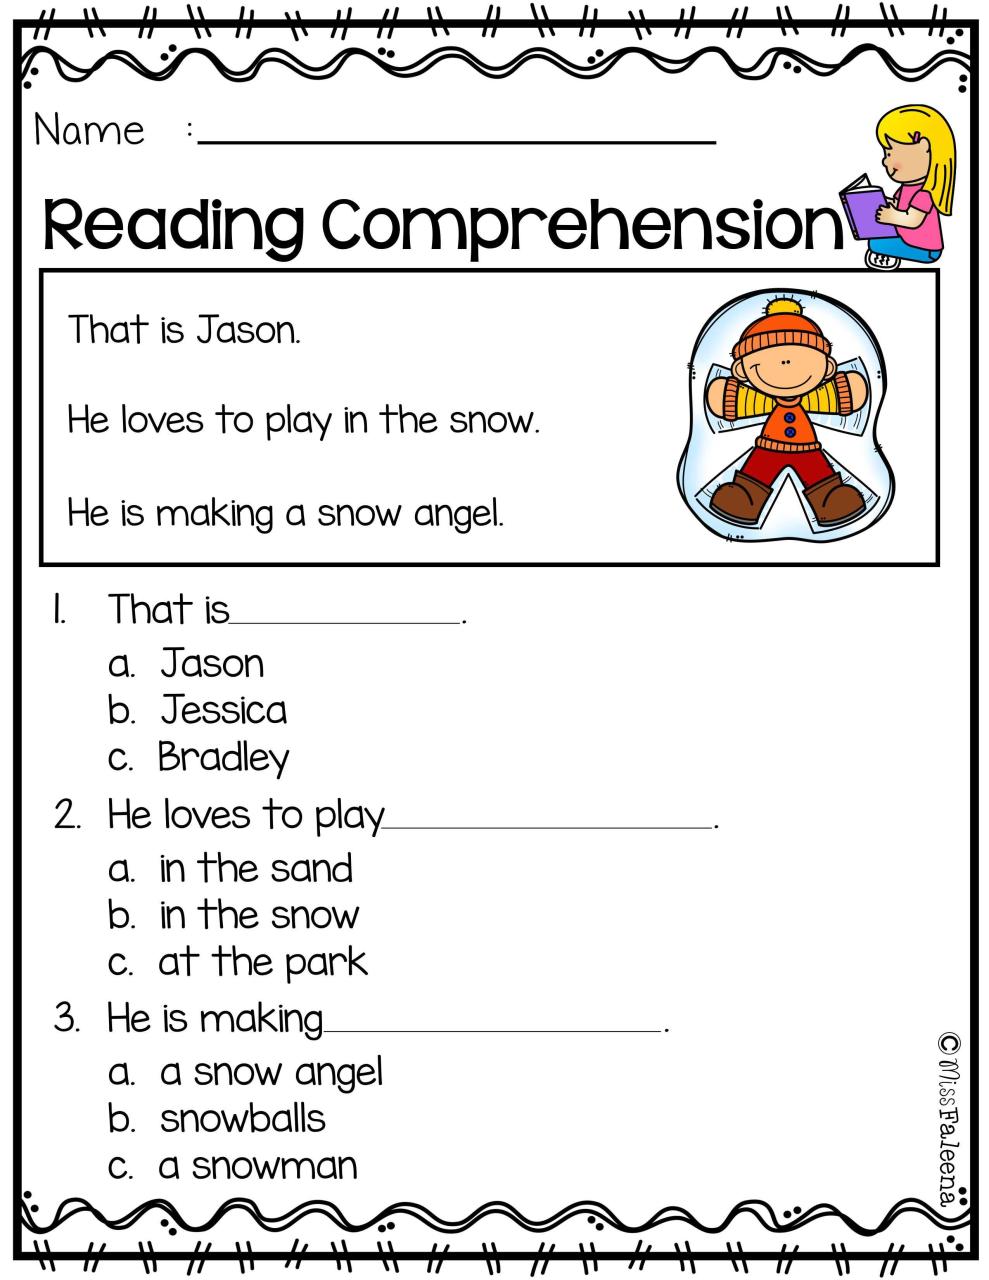 Free Reading Comprehension is suitable for Kindergarten students or